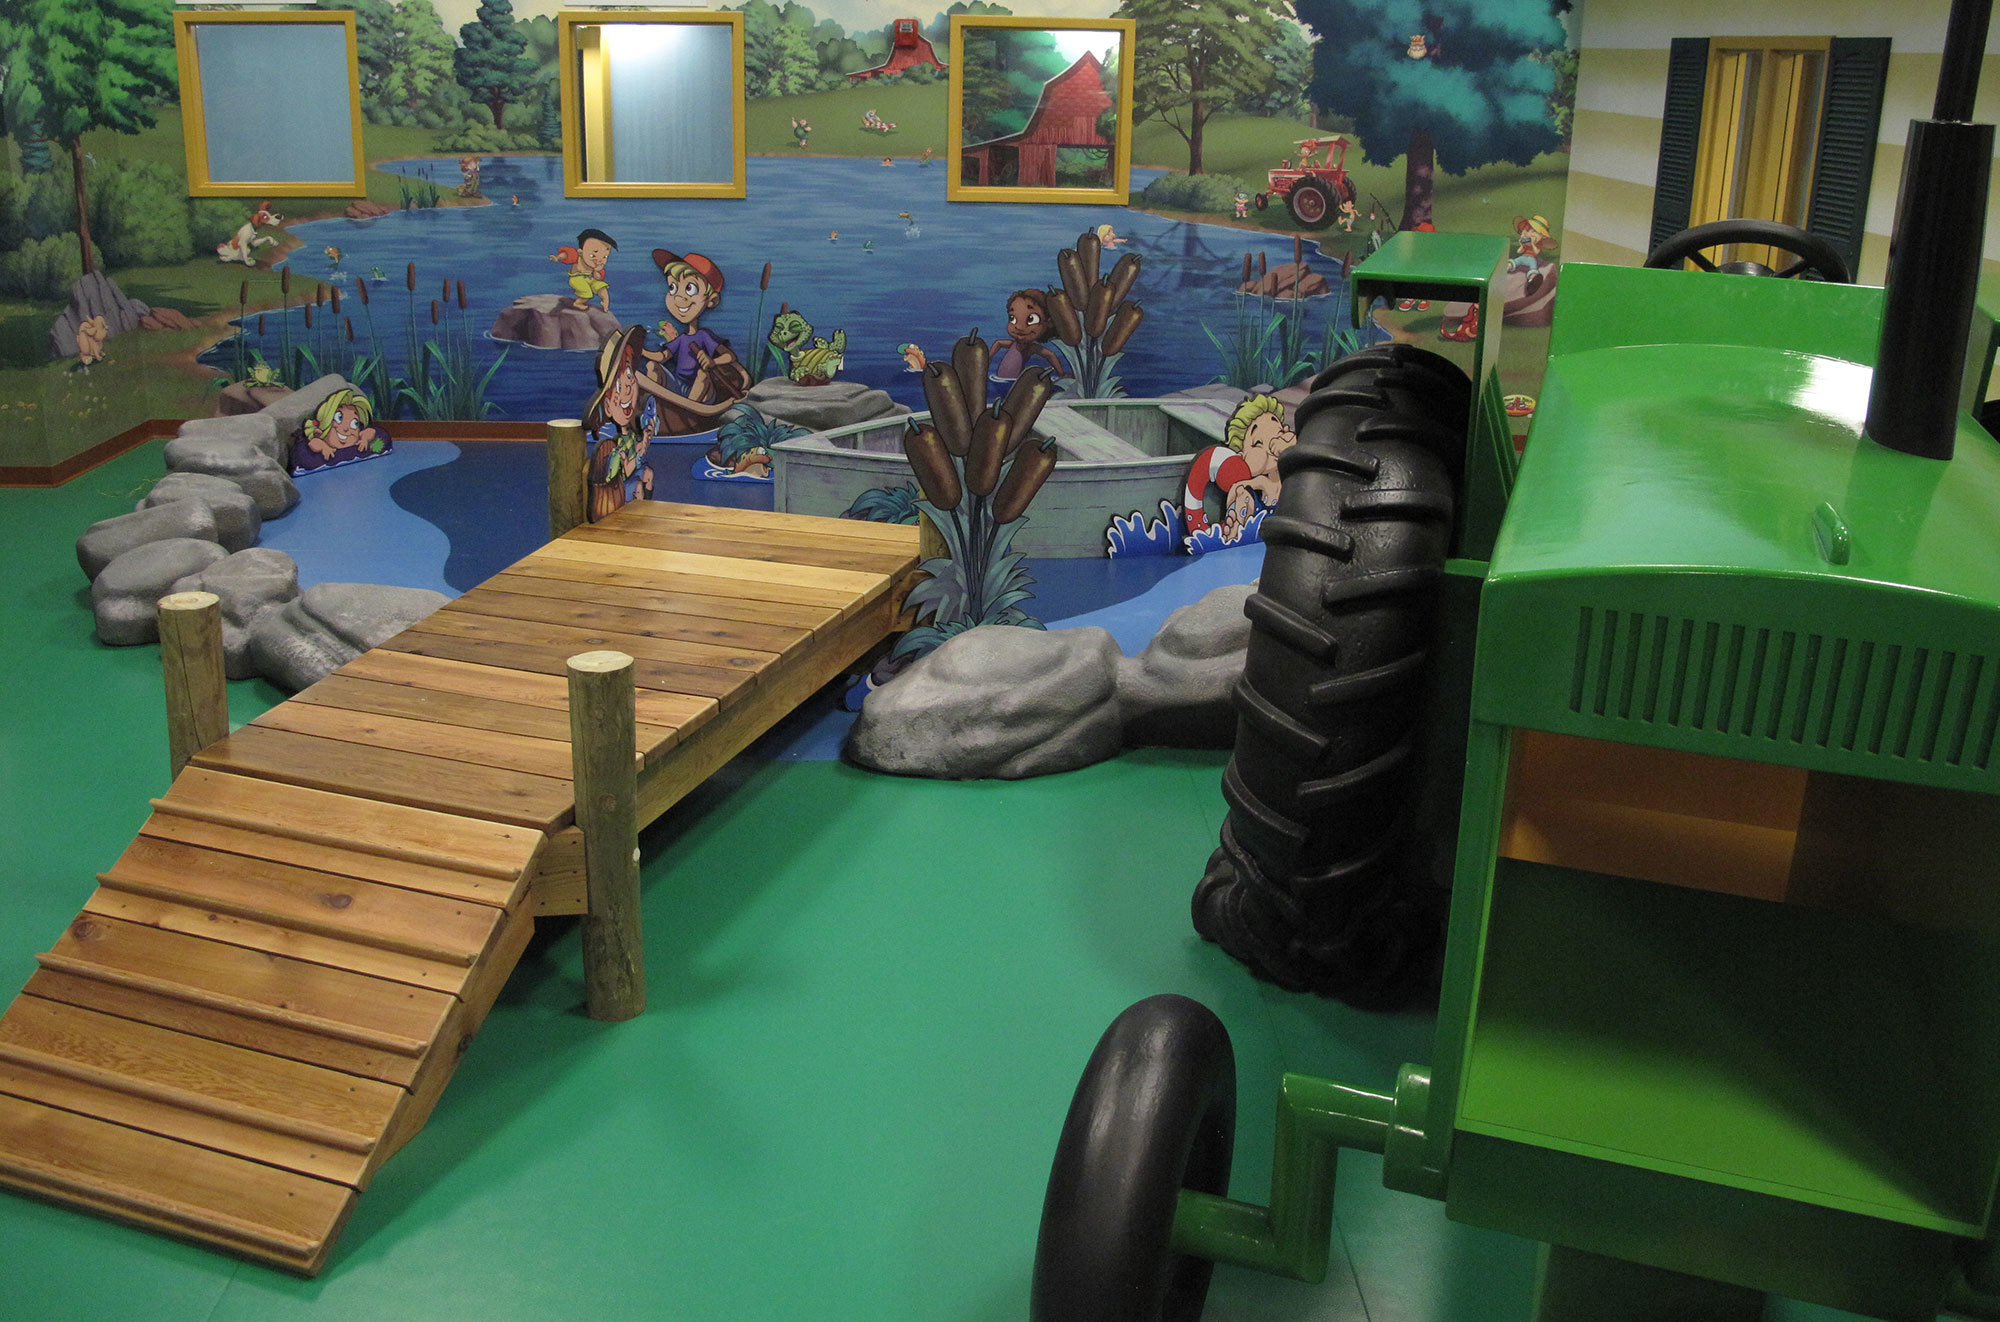 Green Tractor play feature, wooden bridge, faux lake with boat and sculpted rocks and characters in a Farm Themed Environment at Hardin Baptist Church